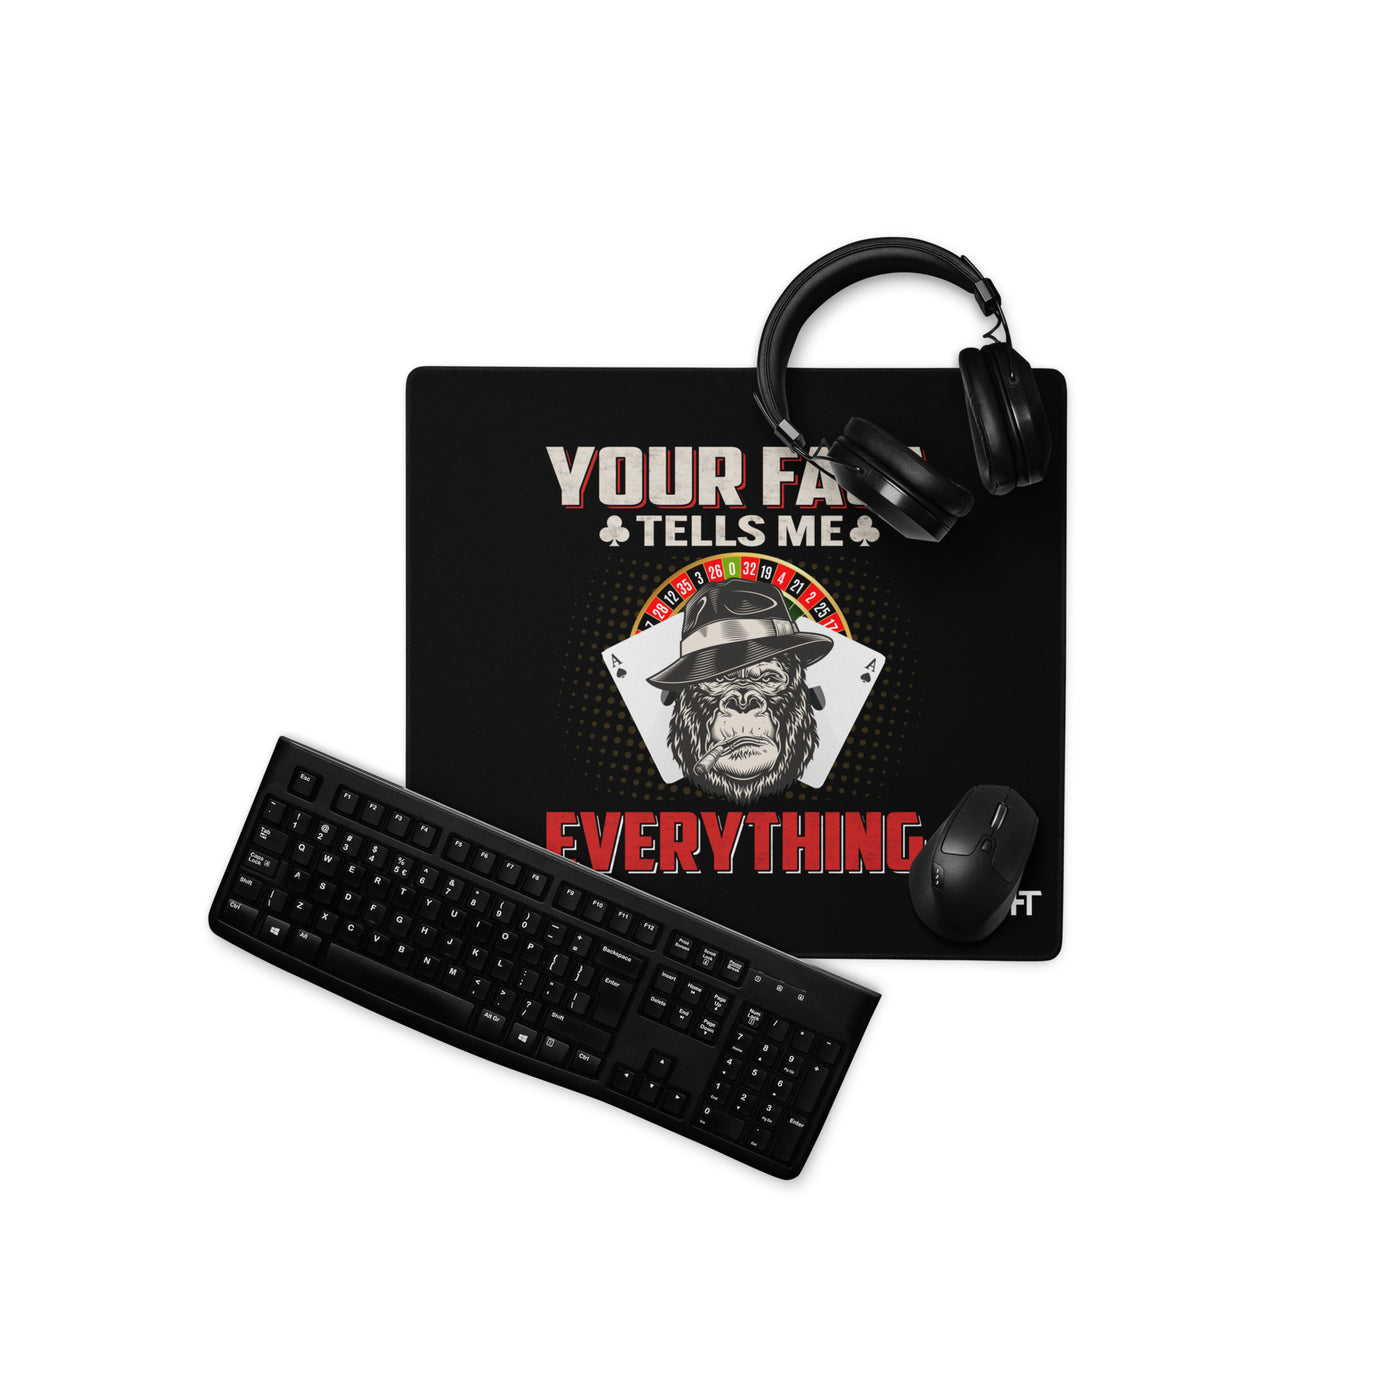 Your Face Tells me Everything - Desk Mat